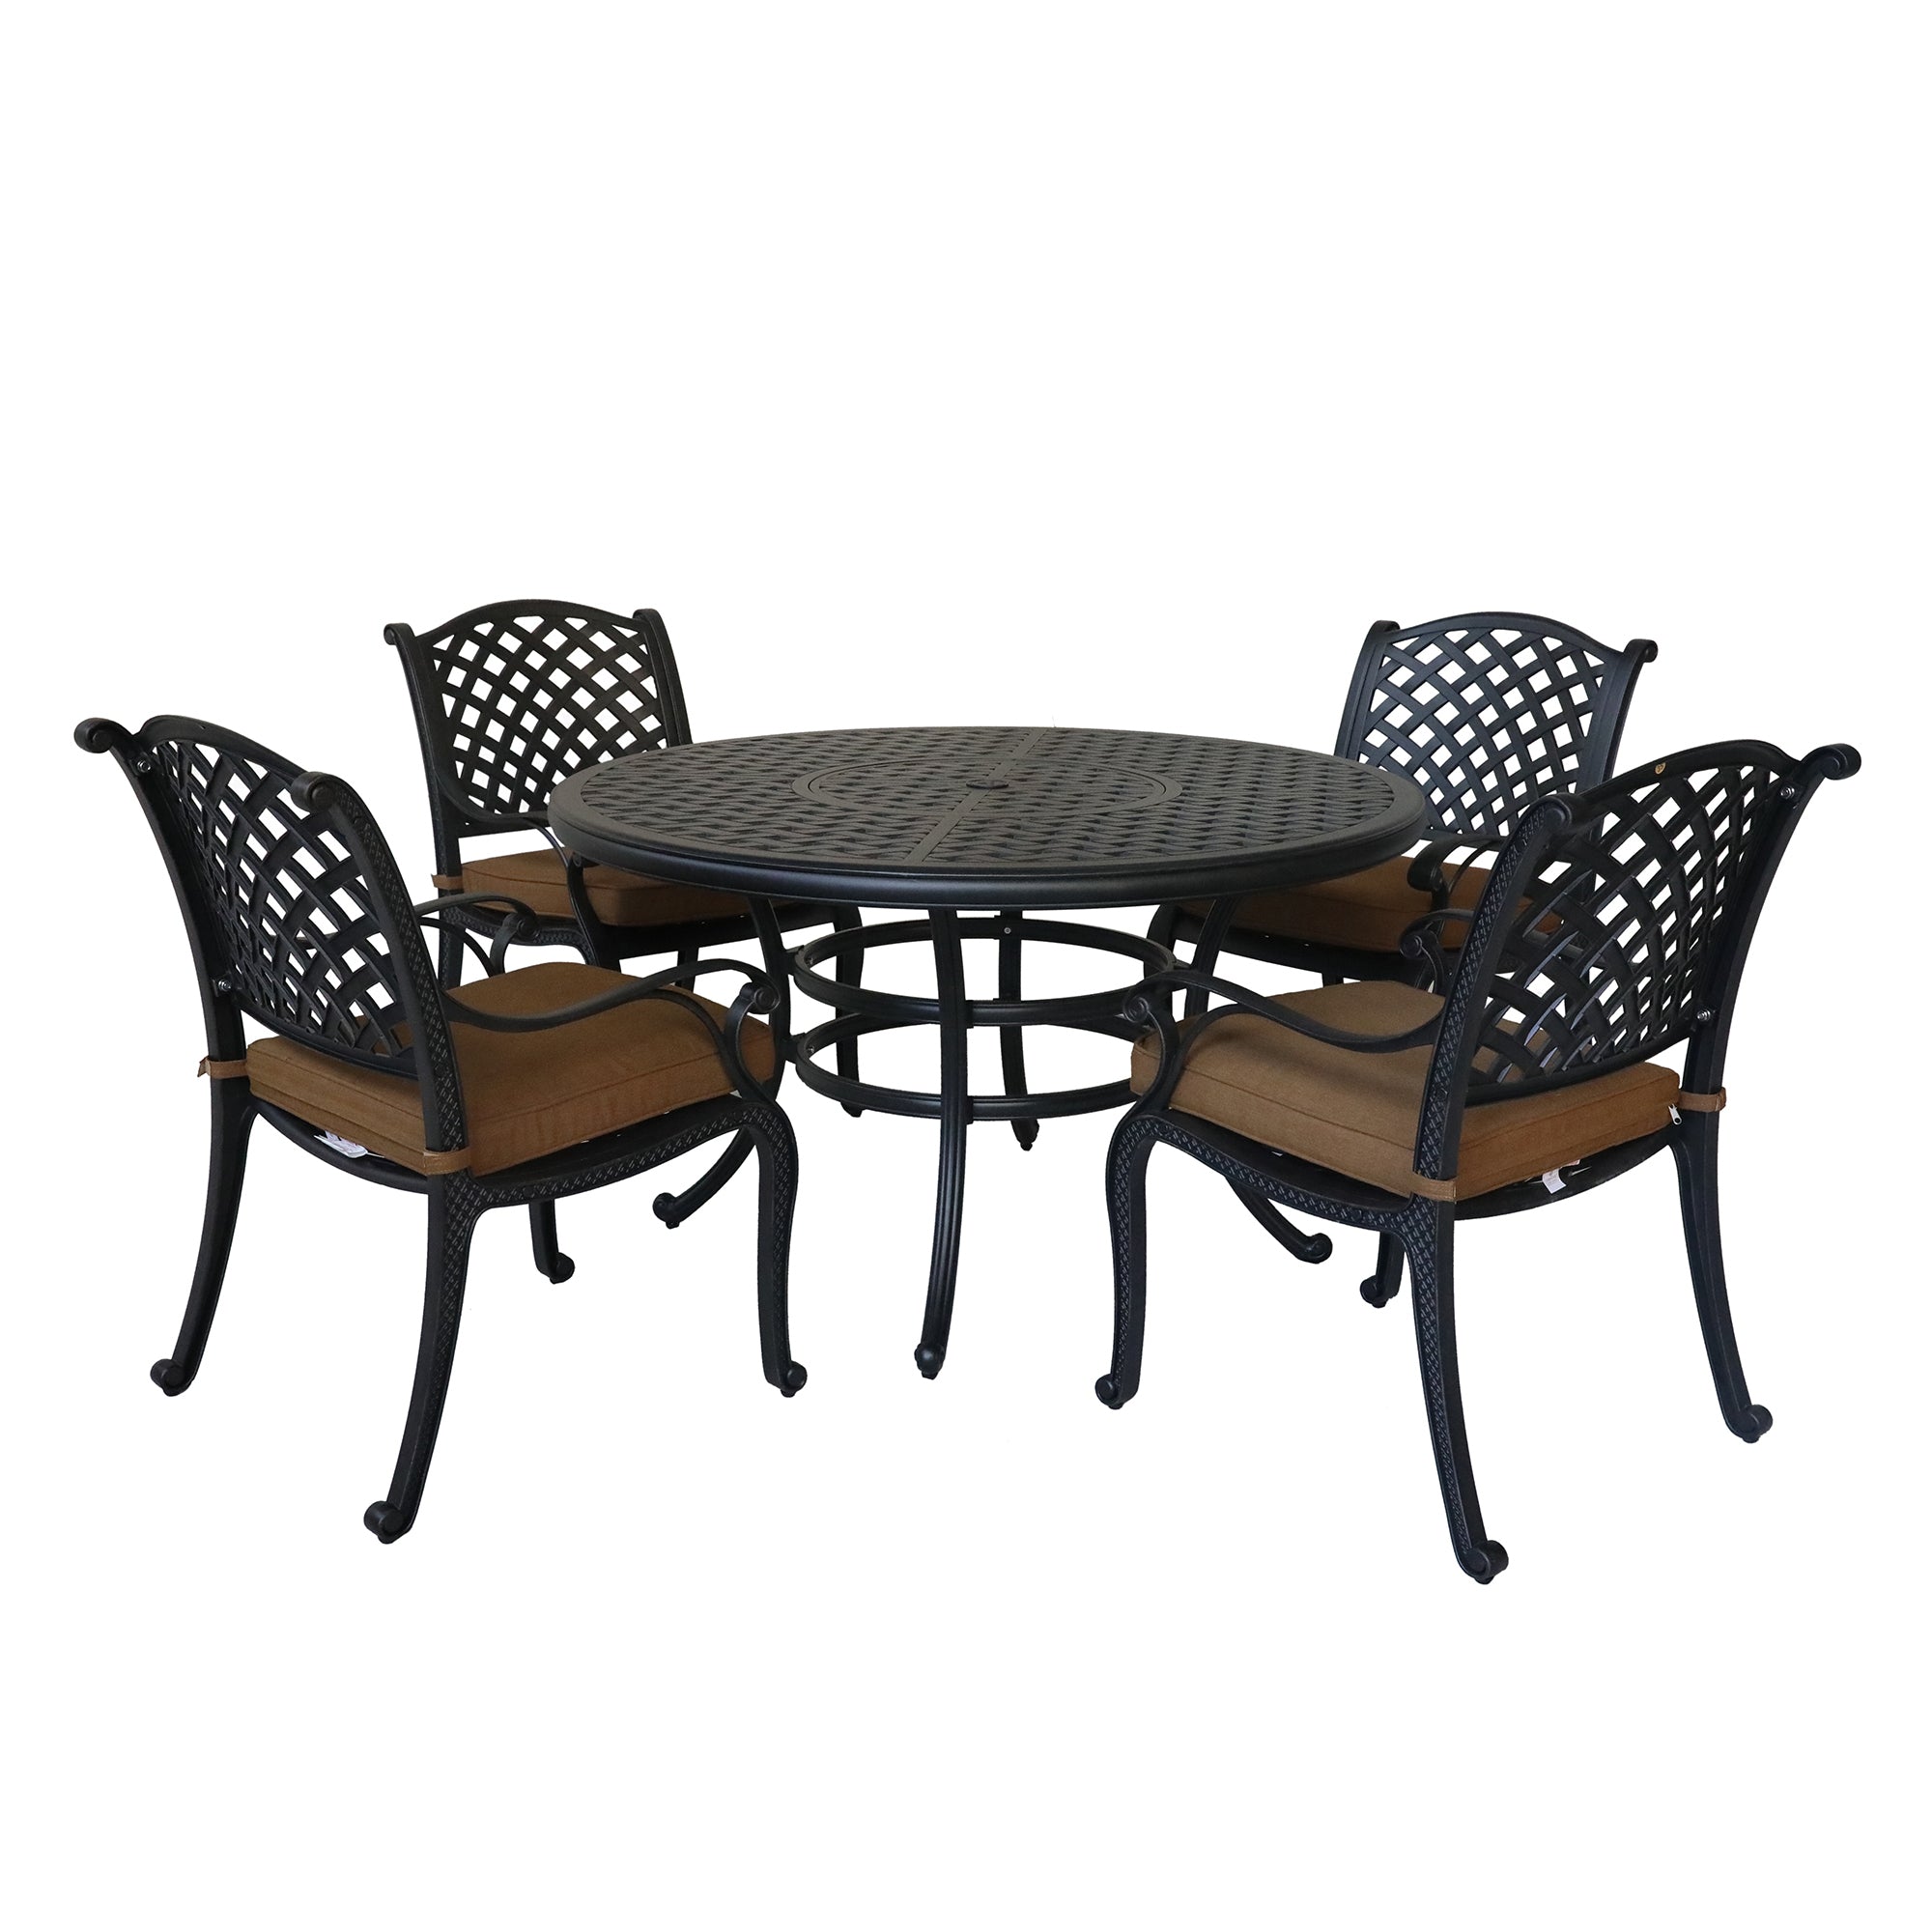 Round 4 Person 52" Long Dining Set with Cushions, antique brown-polyester-aluminum